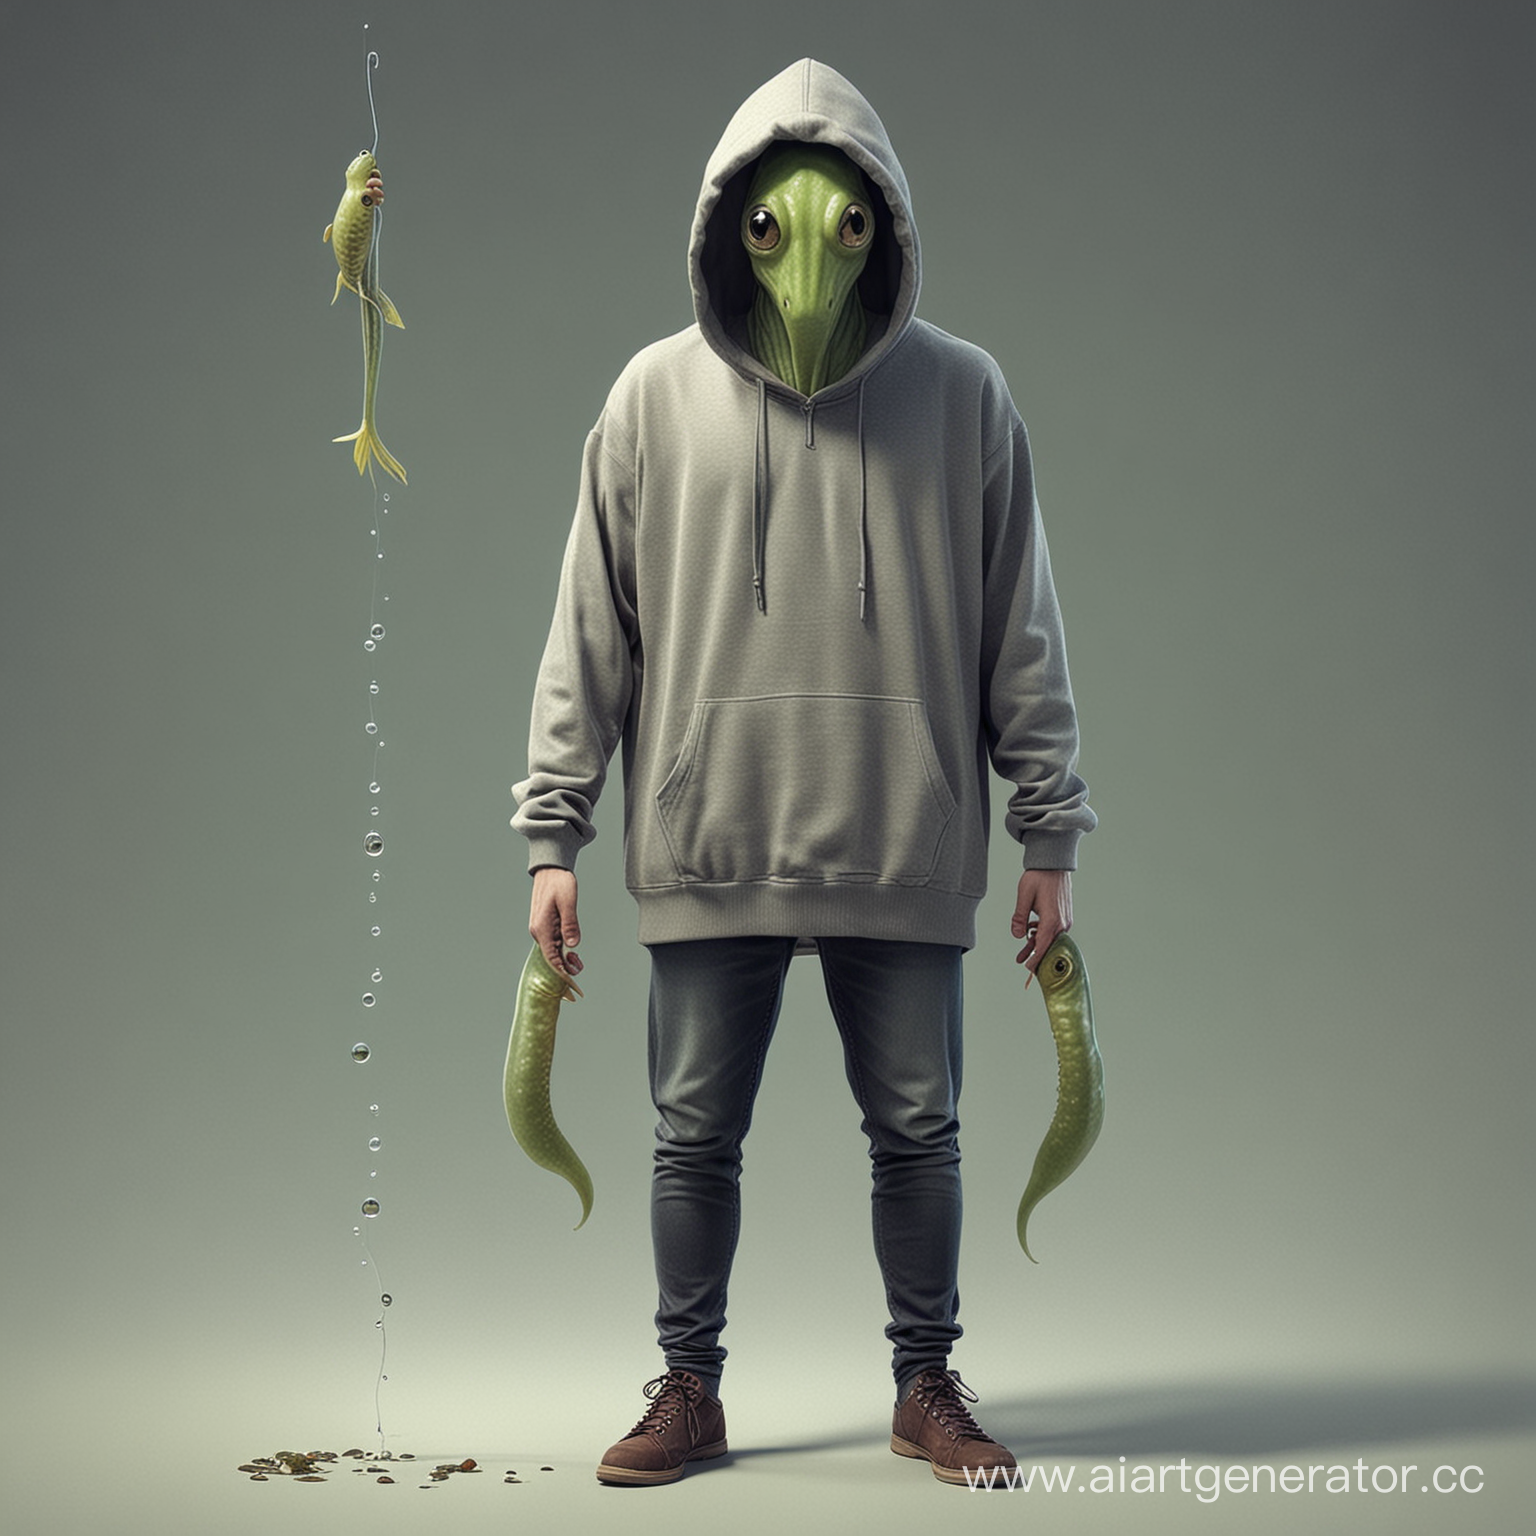 A tall thin man in a hoodie with a tadpole head instead of his own